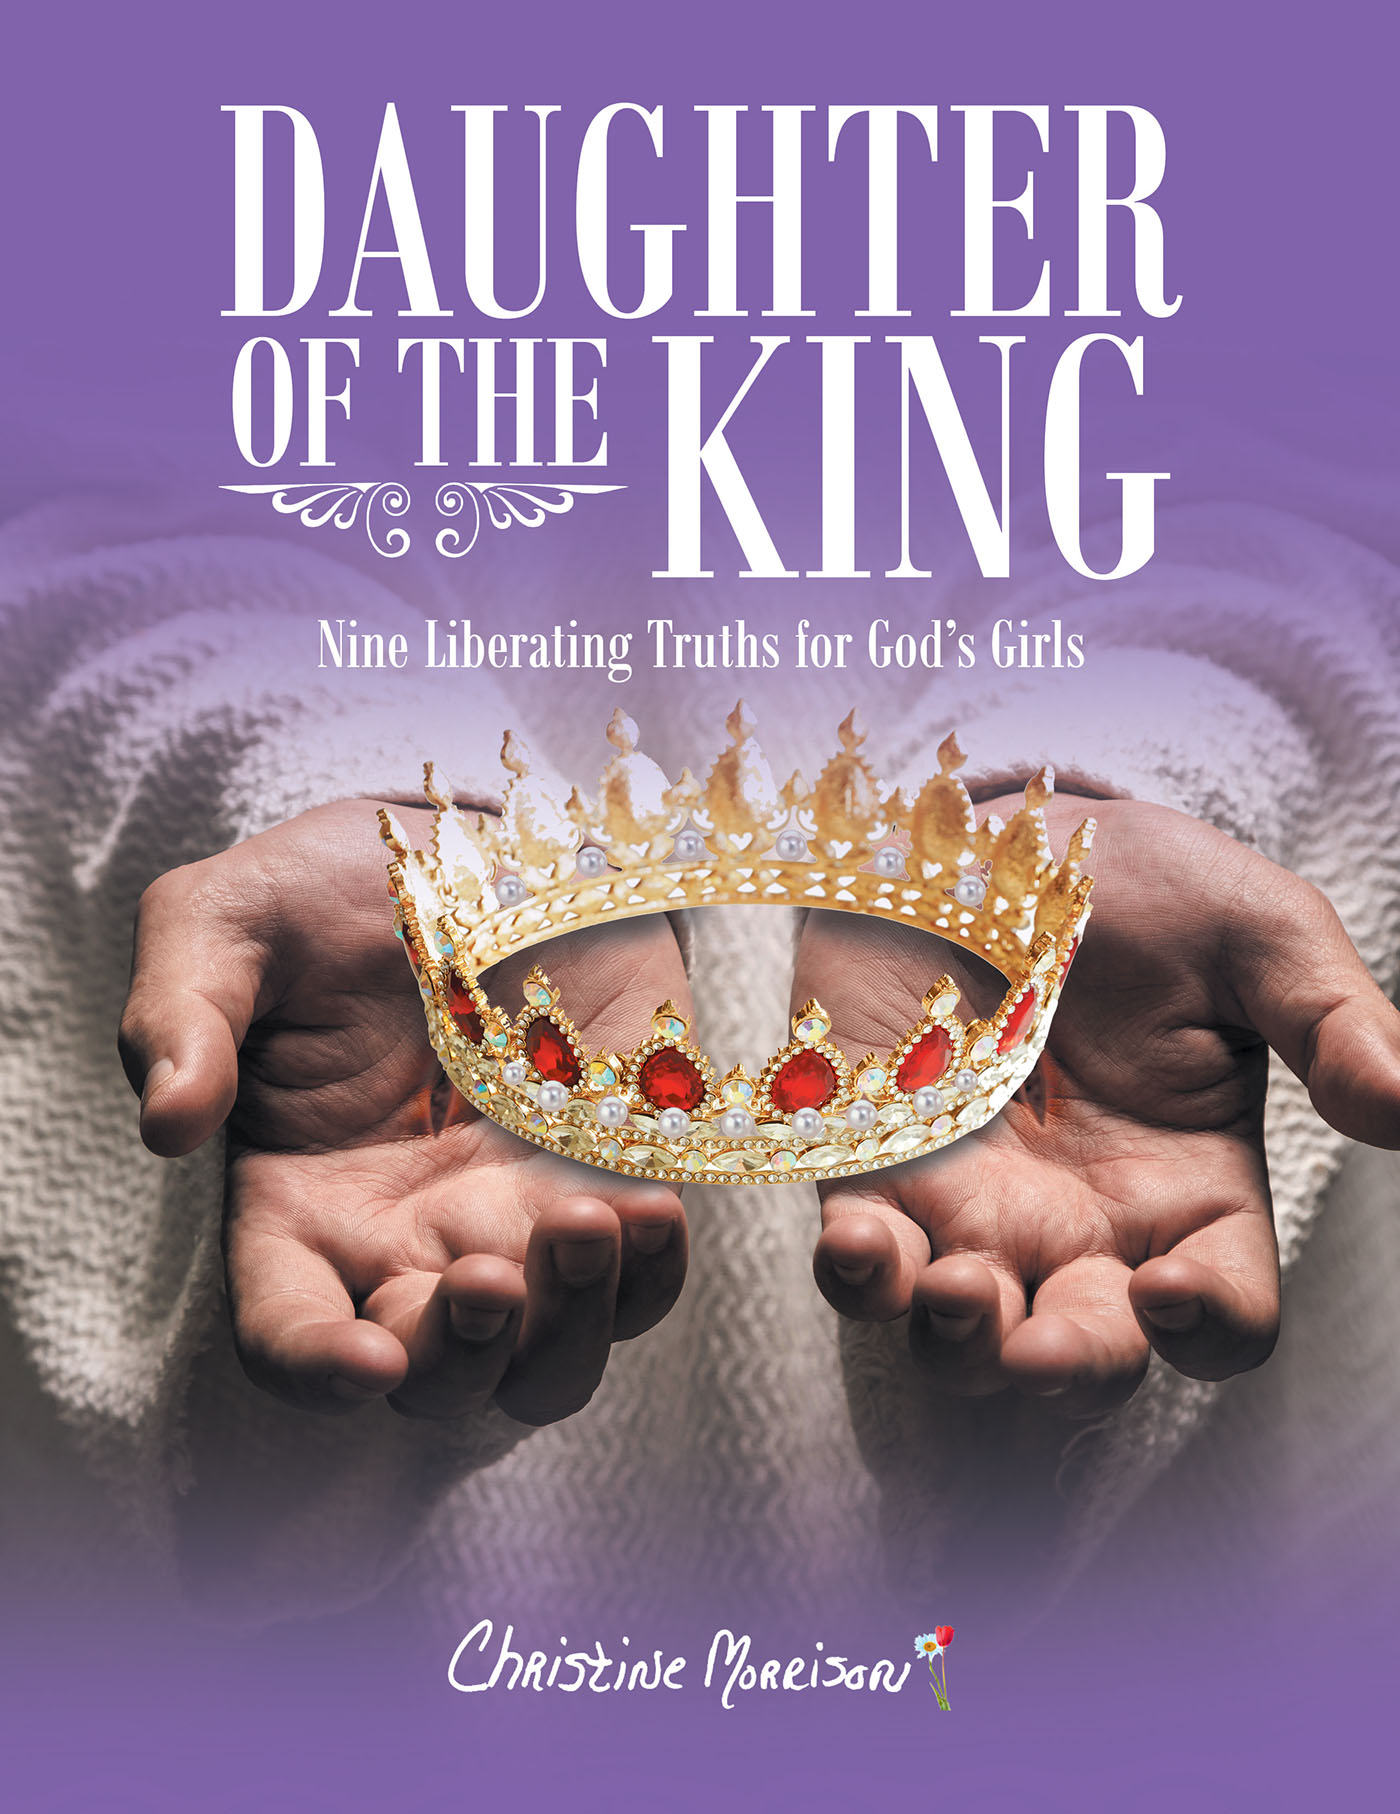 Author Christine Morrison’s New Book, "Daughter of the King: Nine Liberating Truths for God's Girls," is an Engaging and Eye-Opening Bible Study